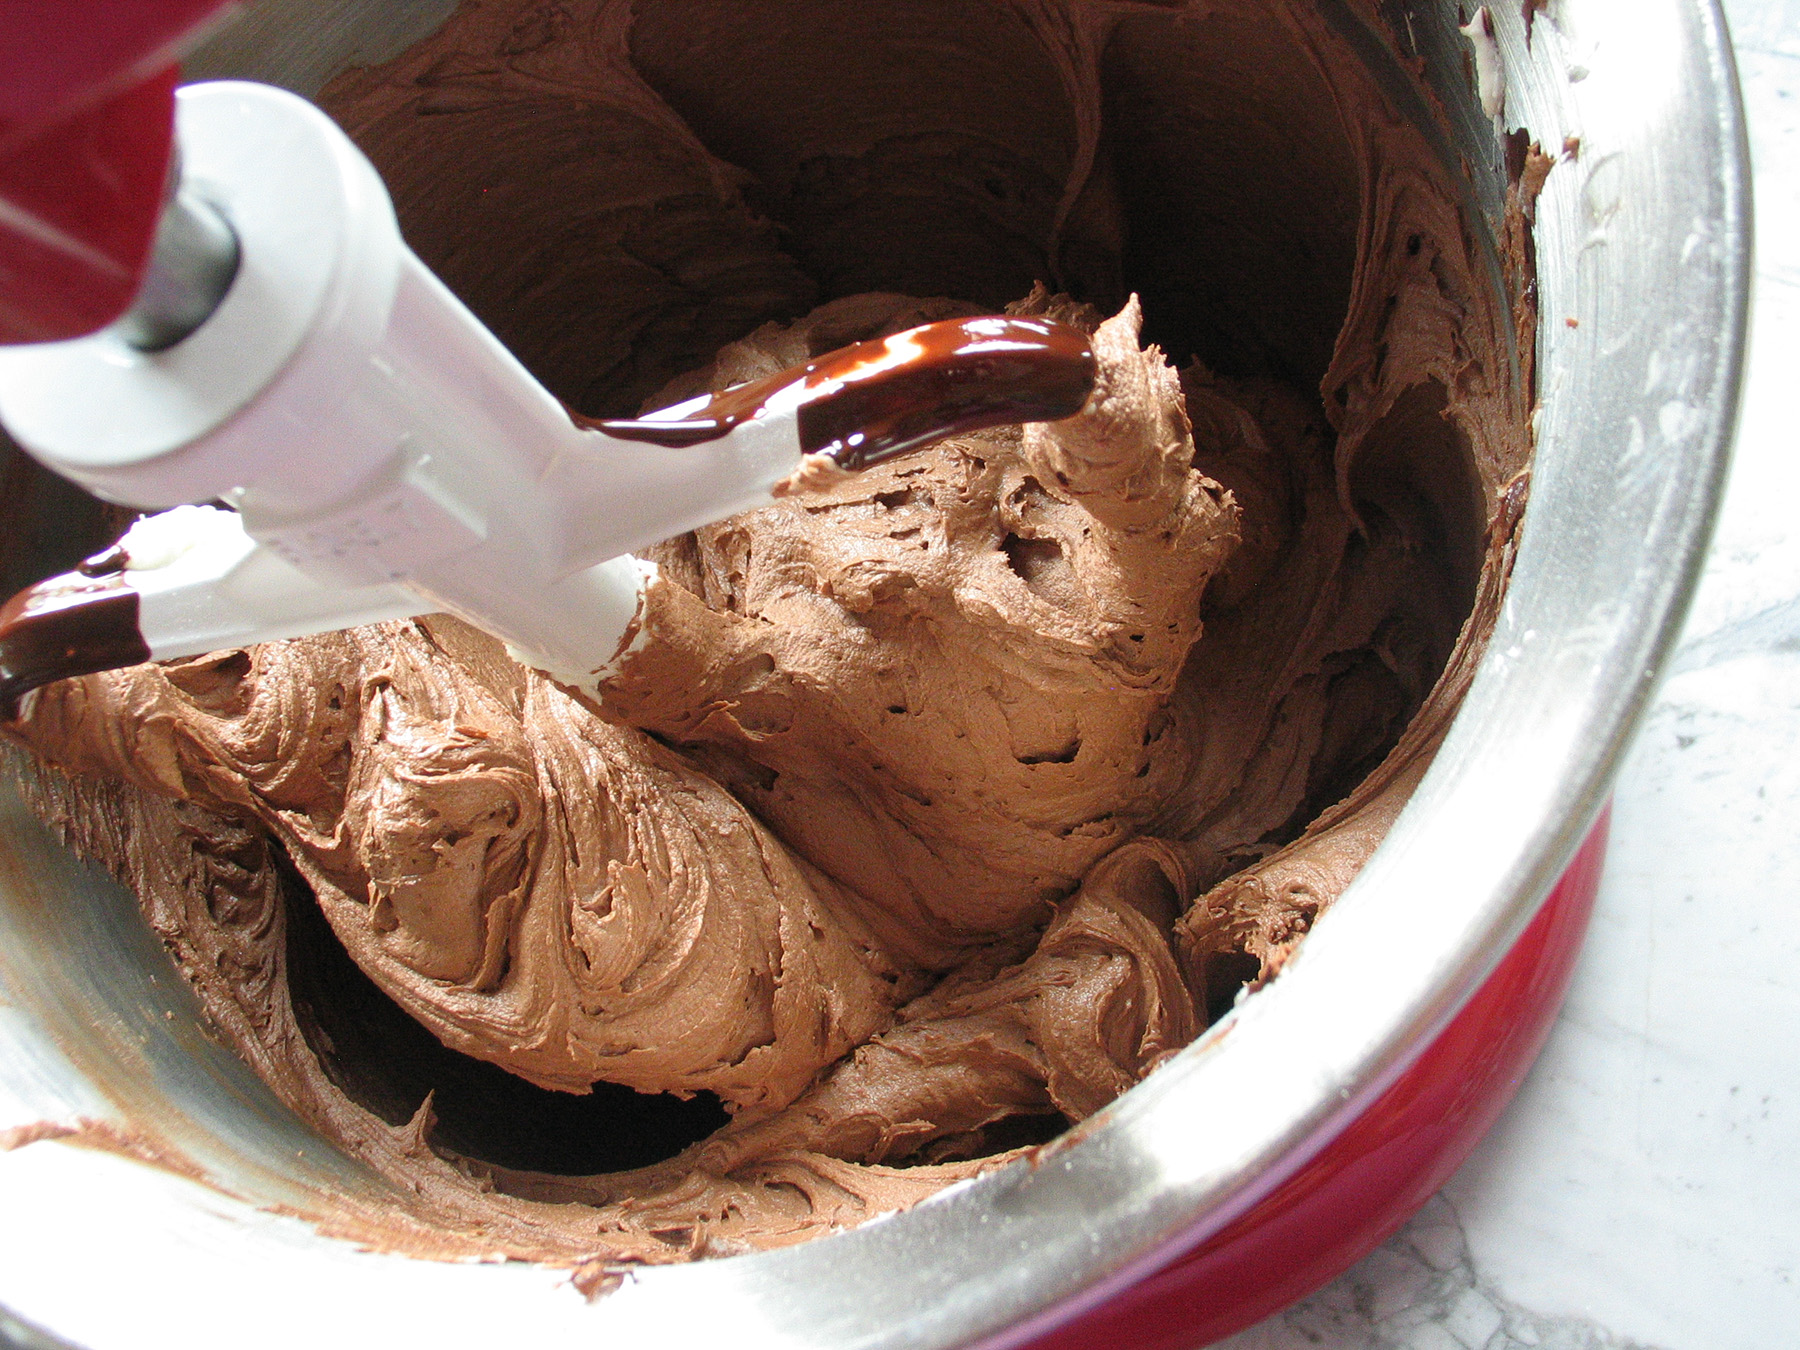 Fudgy Chocolate Frosting